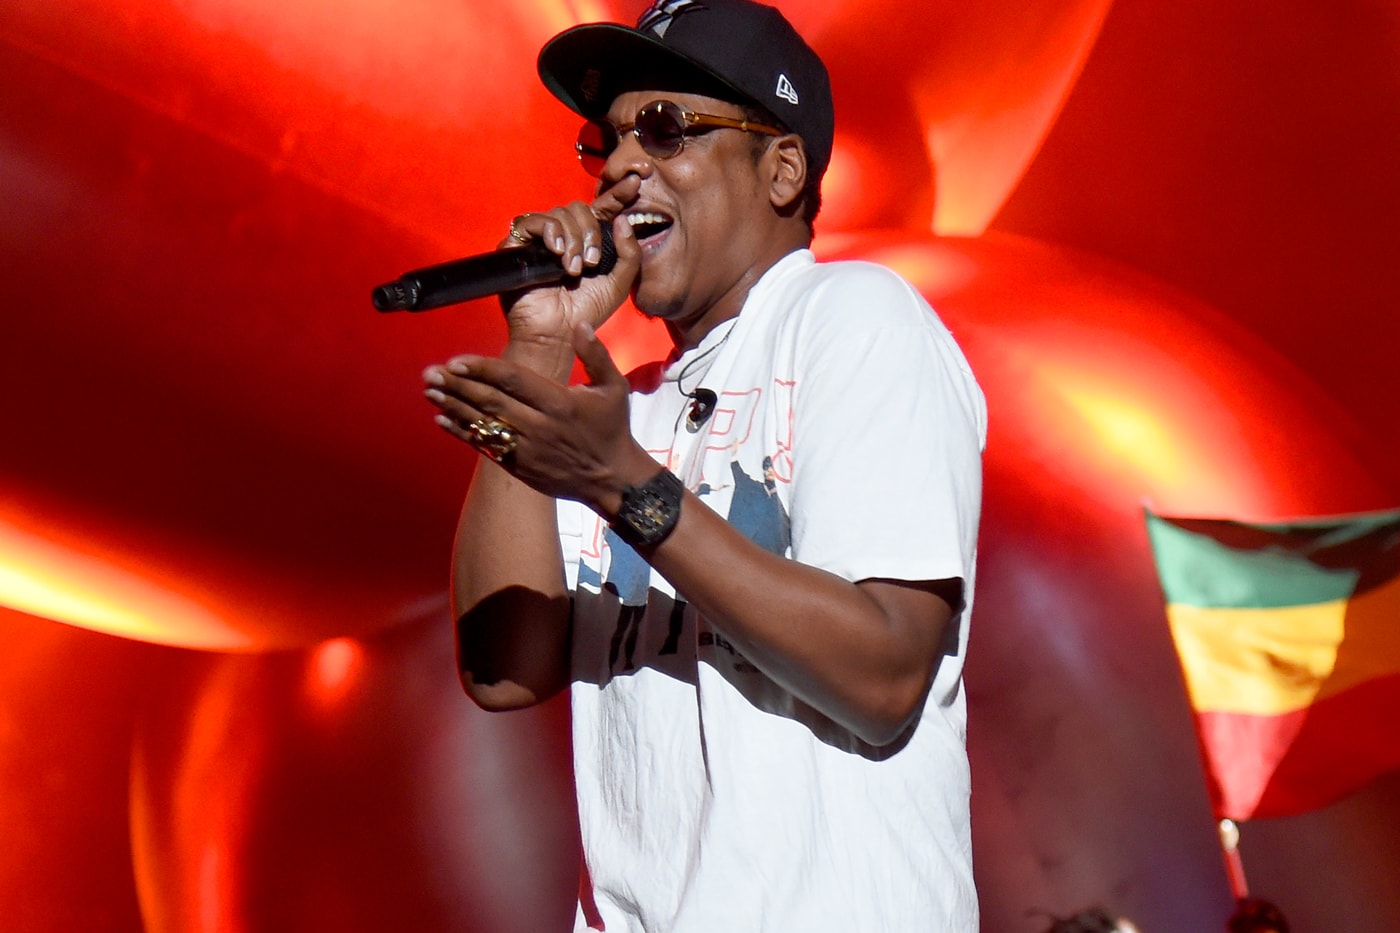 jay-z-suing-tidal-owners-lawsuit